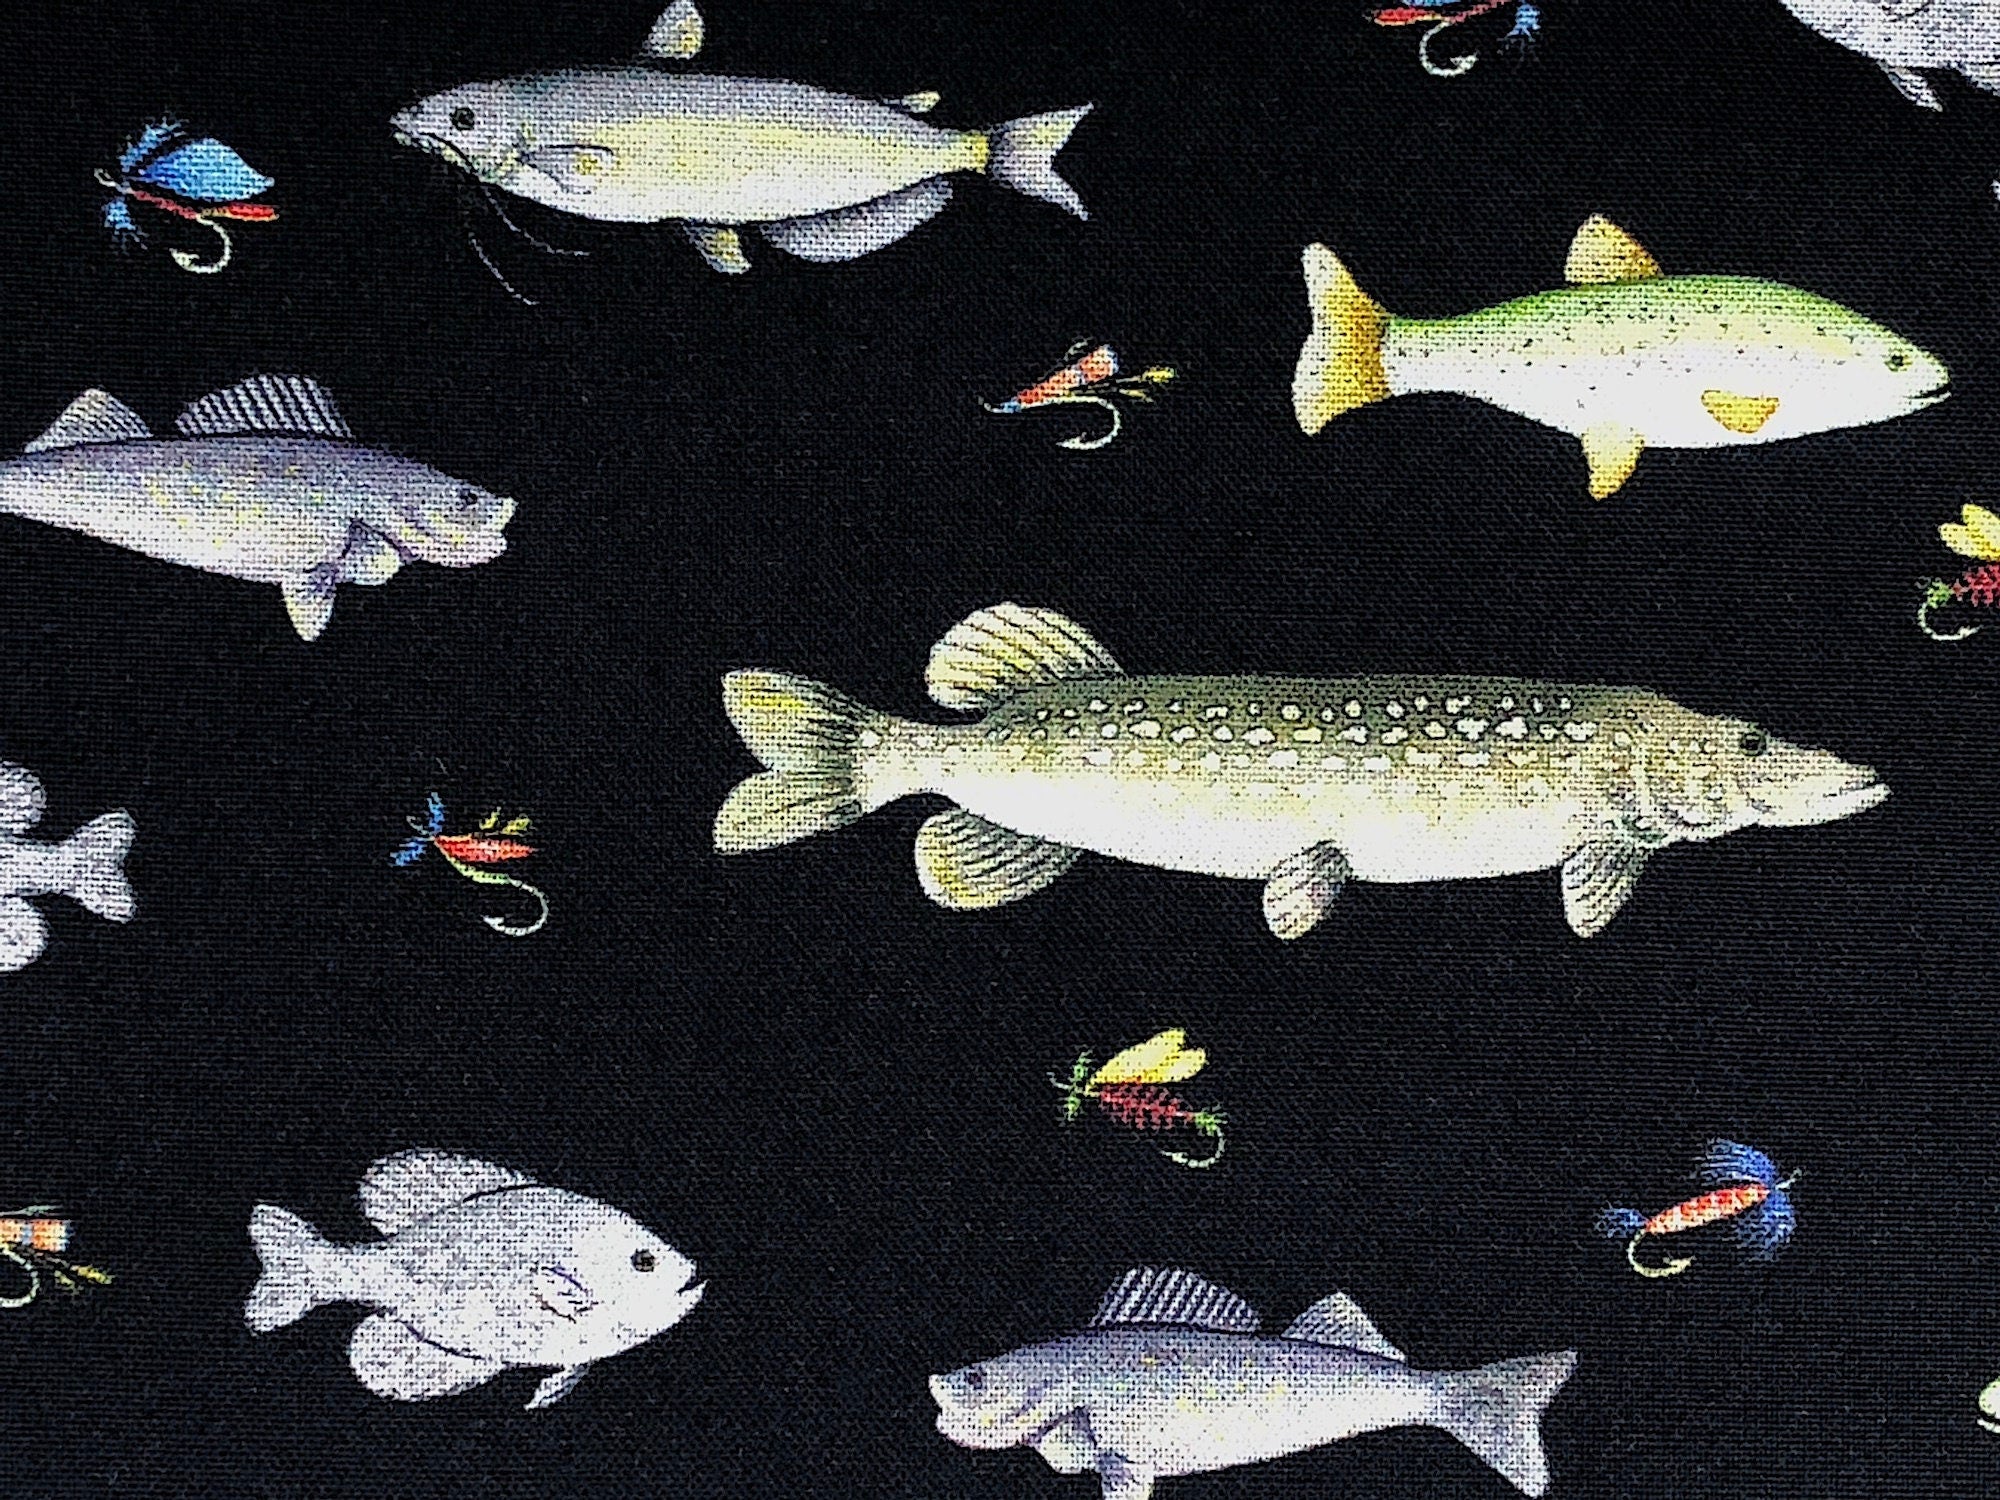 This fabric is called Go Fish Black and is part of the Keep It Reel collection. It is covered with various fish and fishing flies.